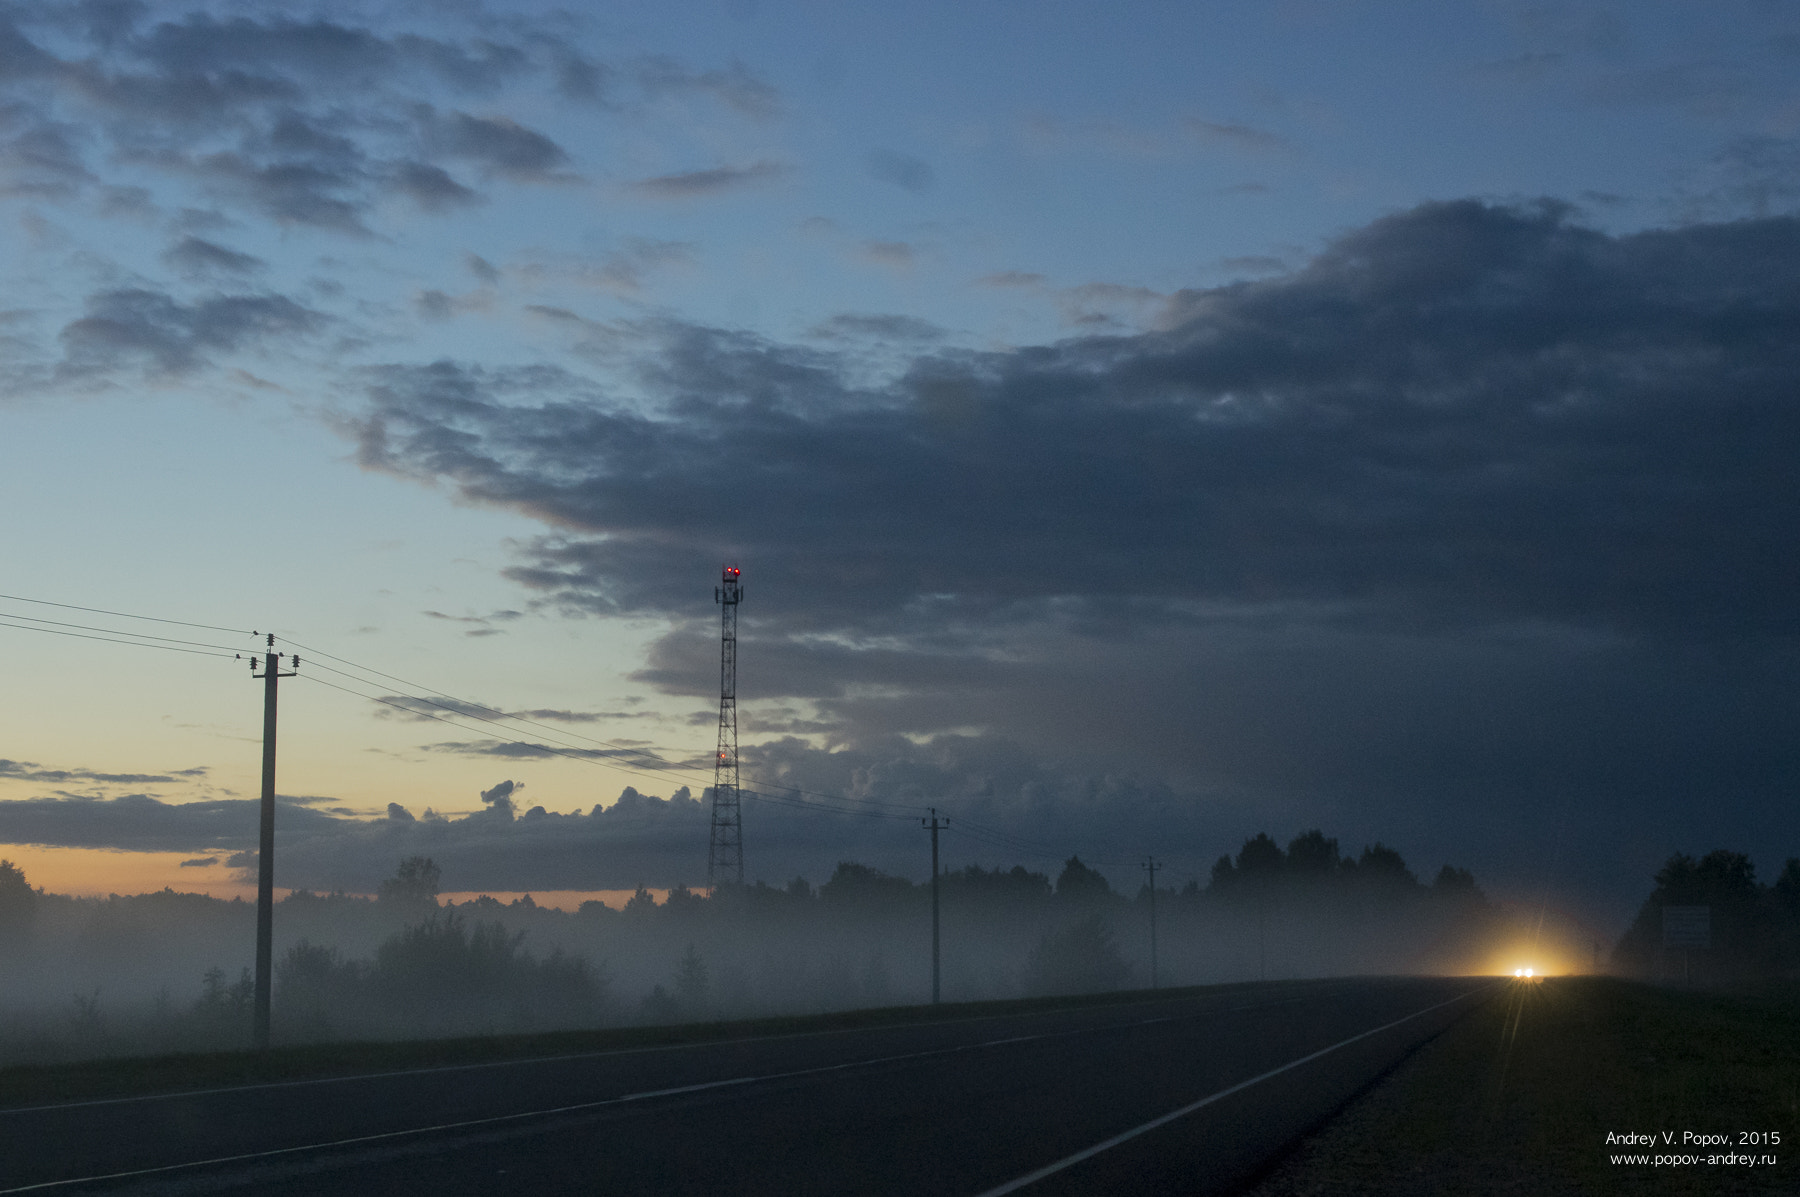 Pentax K-3 sample photo. Bryanschina unveiled (fog on the road) photography